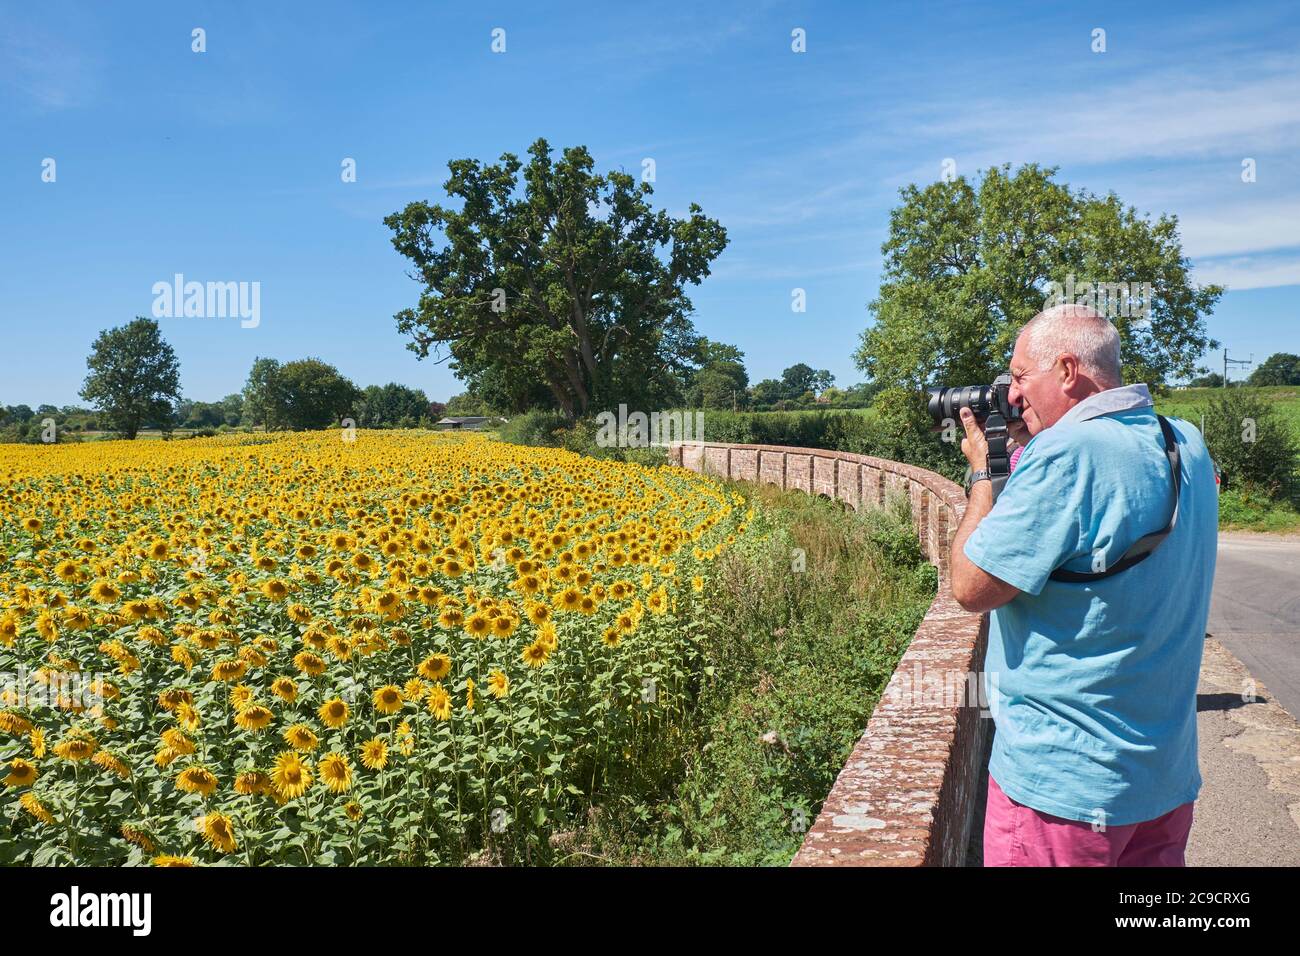 Kellaways, Wiltshire, UK. 30th July, 2020.  With many parts of the UK expecting to experience a mini heatwave during the next few days, a man enjoying the warm sunshine is pictured as he takes a photogaph of sunflowers growing in a field near the village of Kellaways. Credit: Lynchpics/Alamy Live News Stock Photo